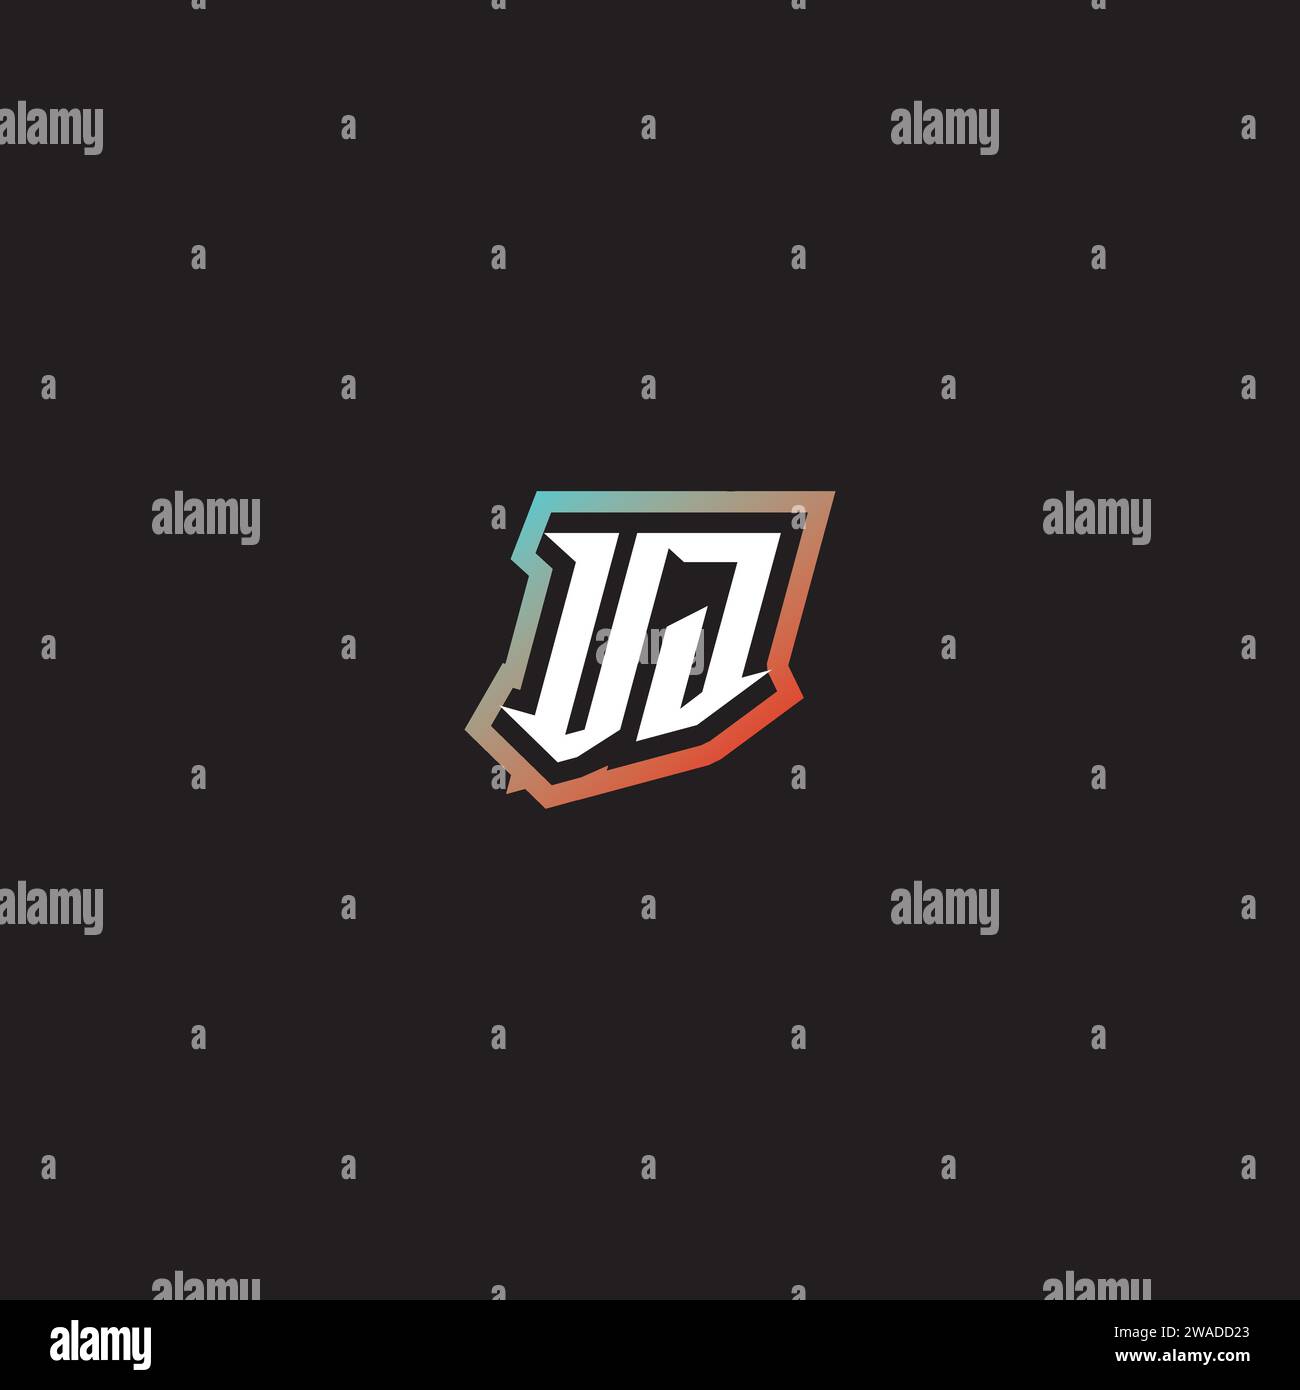 VJ letter combination cool logo esport initial and cool color gradattion ideas Stock Vector